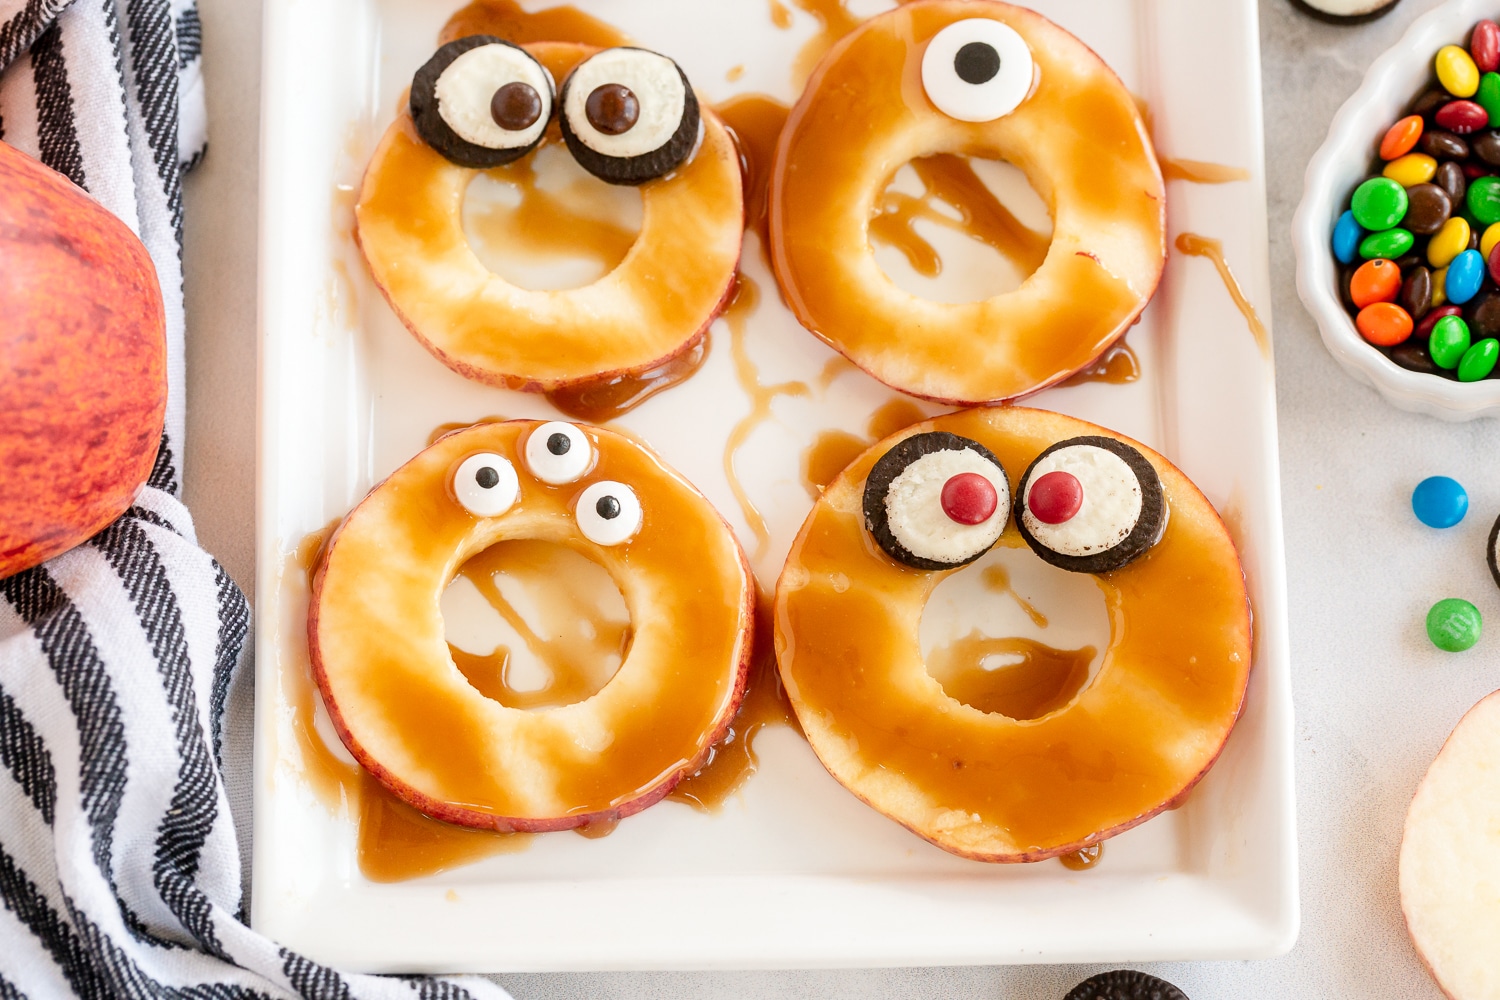 caramel apple slices with edible eyes